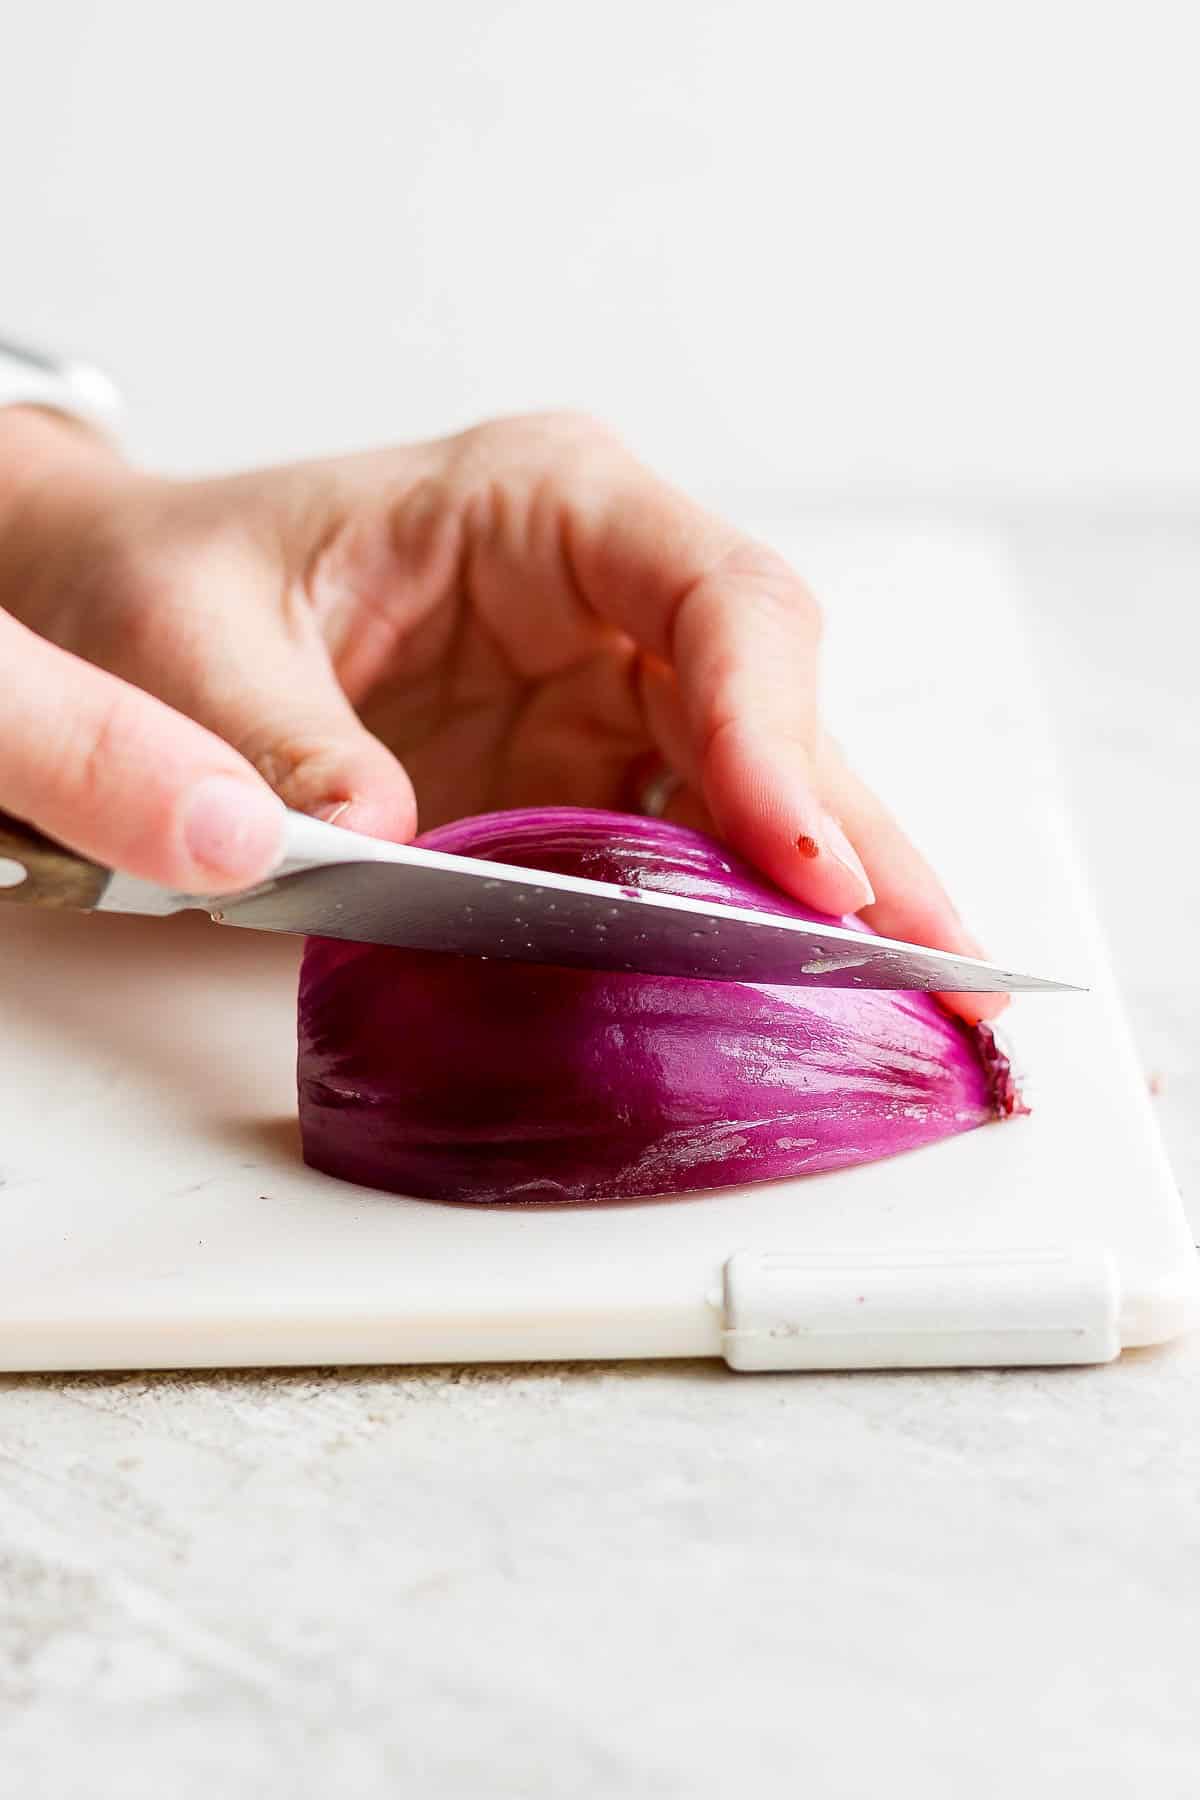 A quarter of a red onion being cut into wedges.